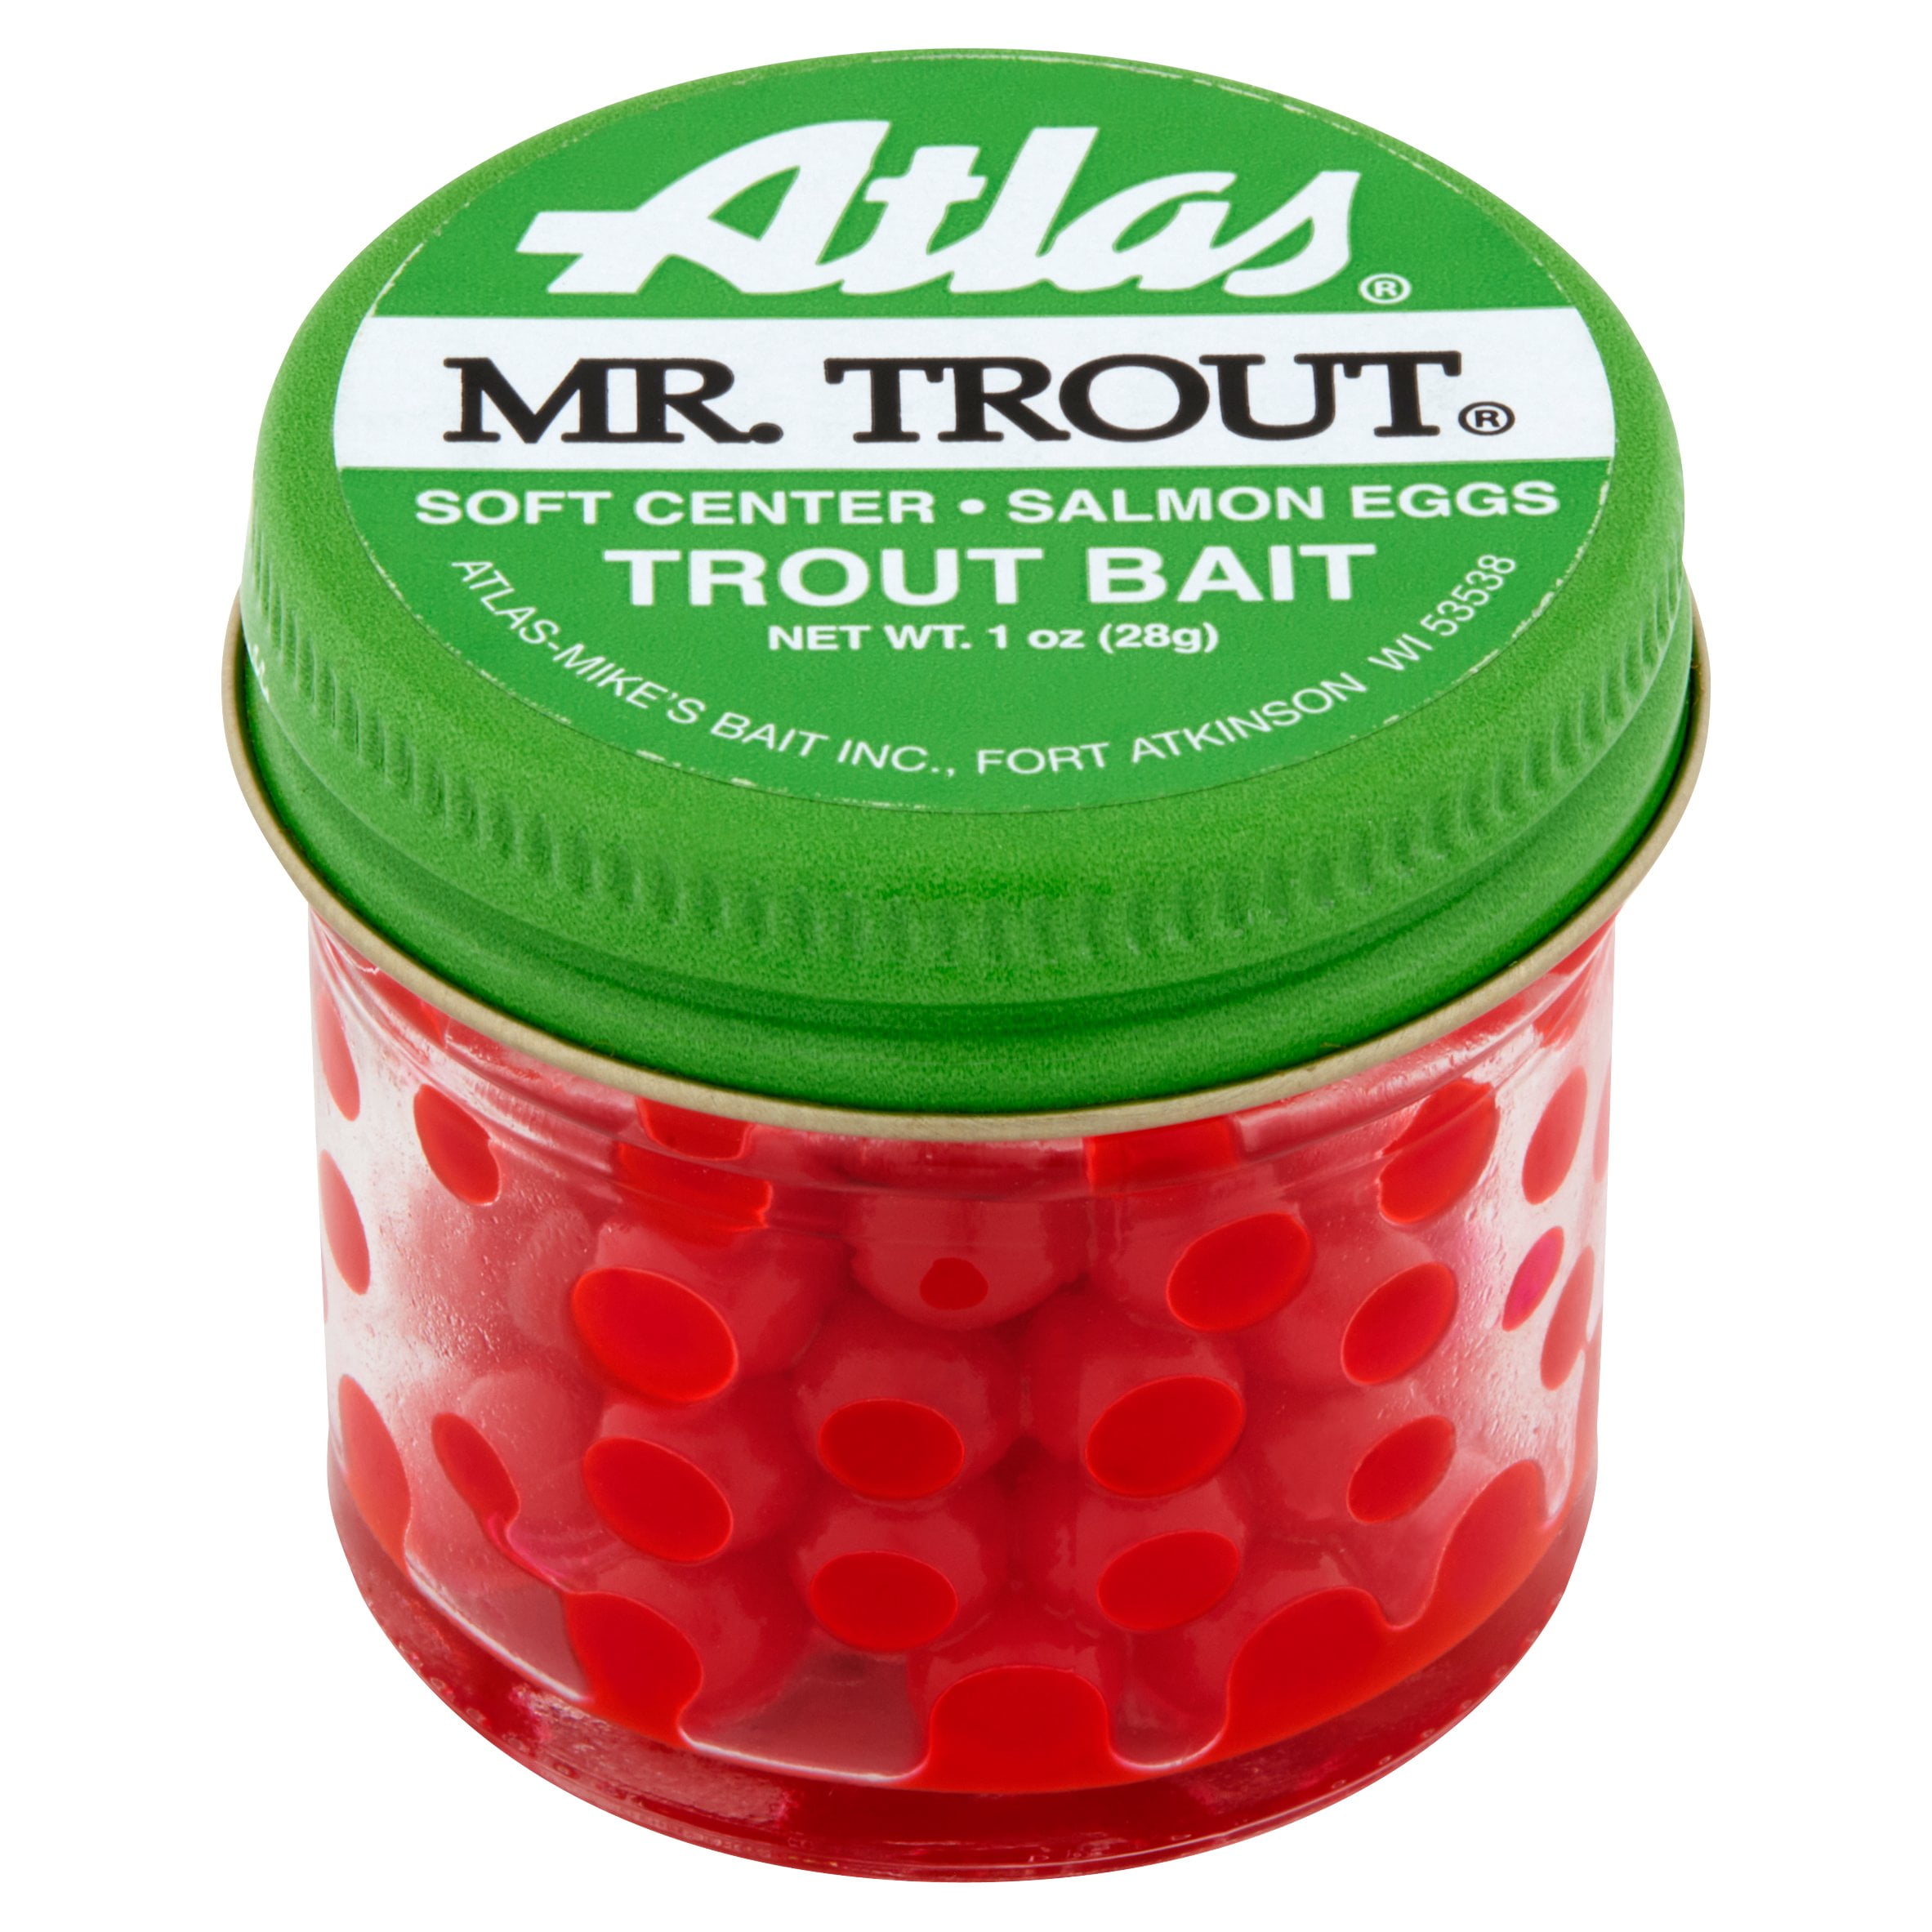 Atlas-Mike's Mr. Trout Salmon Eggs, Red 